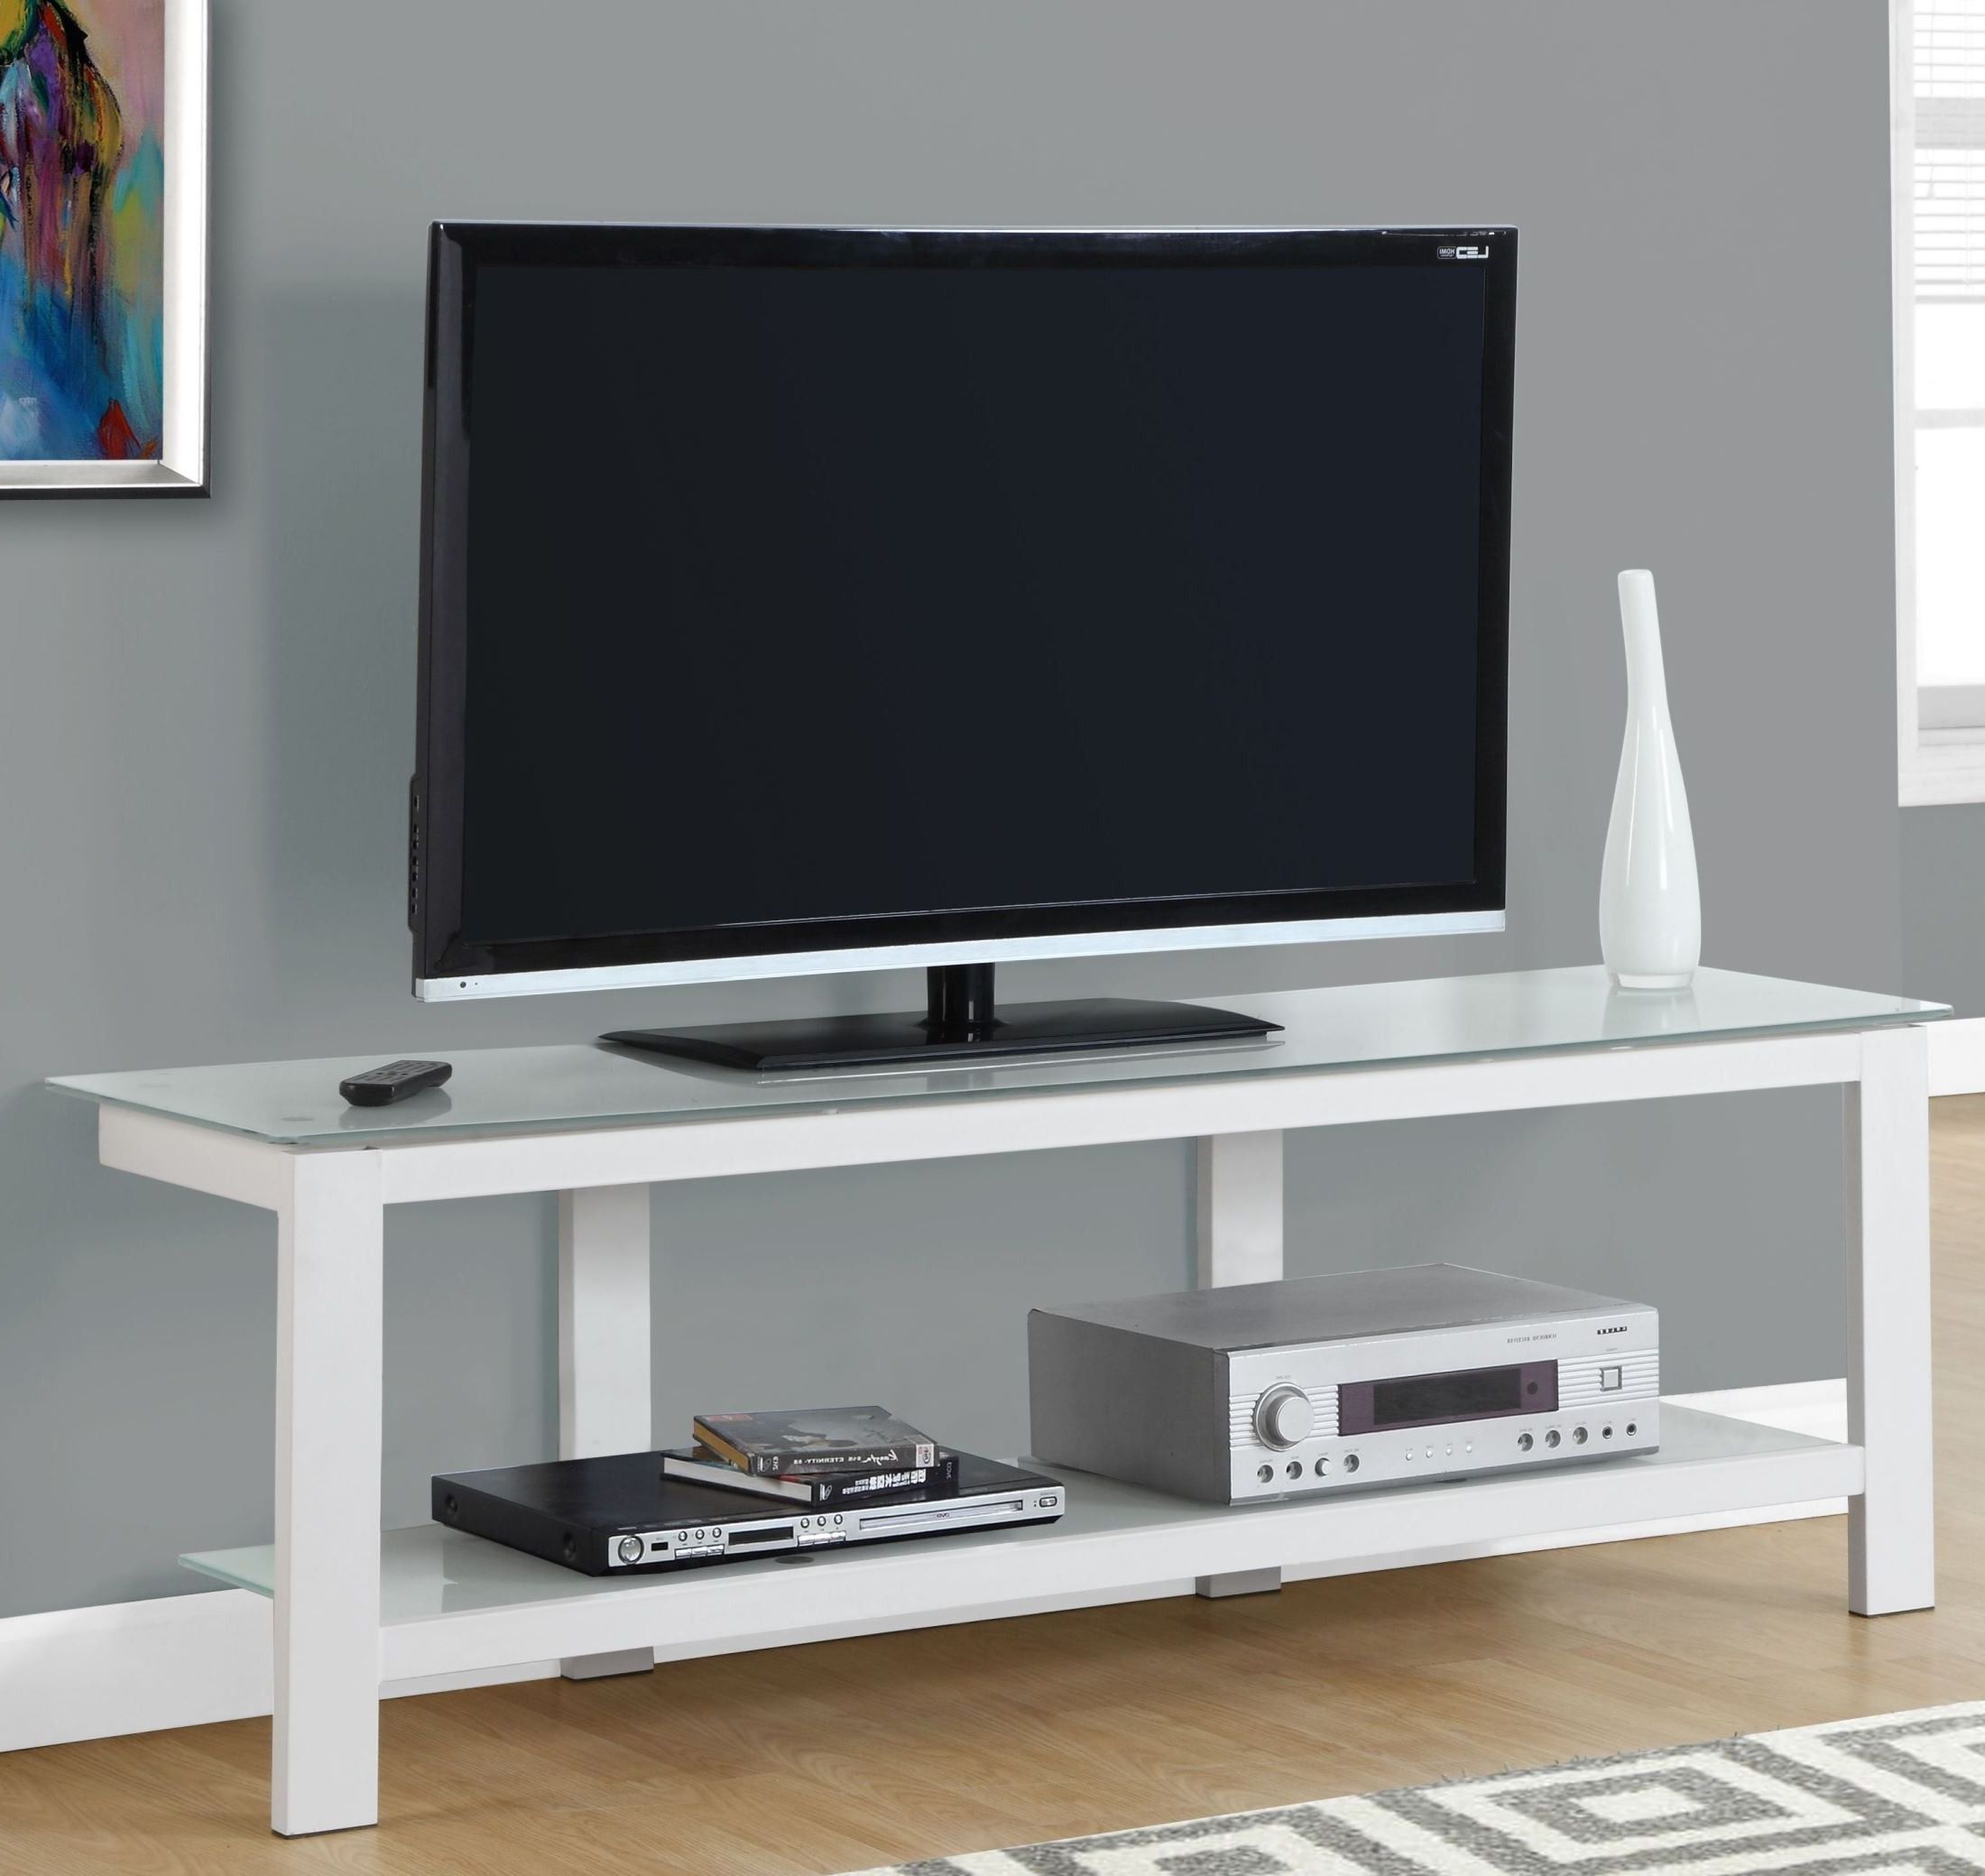 Best And Newest Glass Shelves Tv Stands In White Frosted Tempered Glass 60" Tv Stand From Monarch (View 8 of 10)